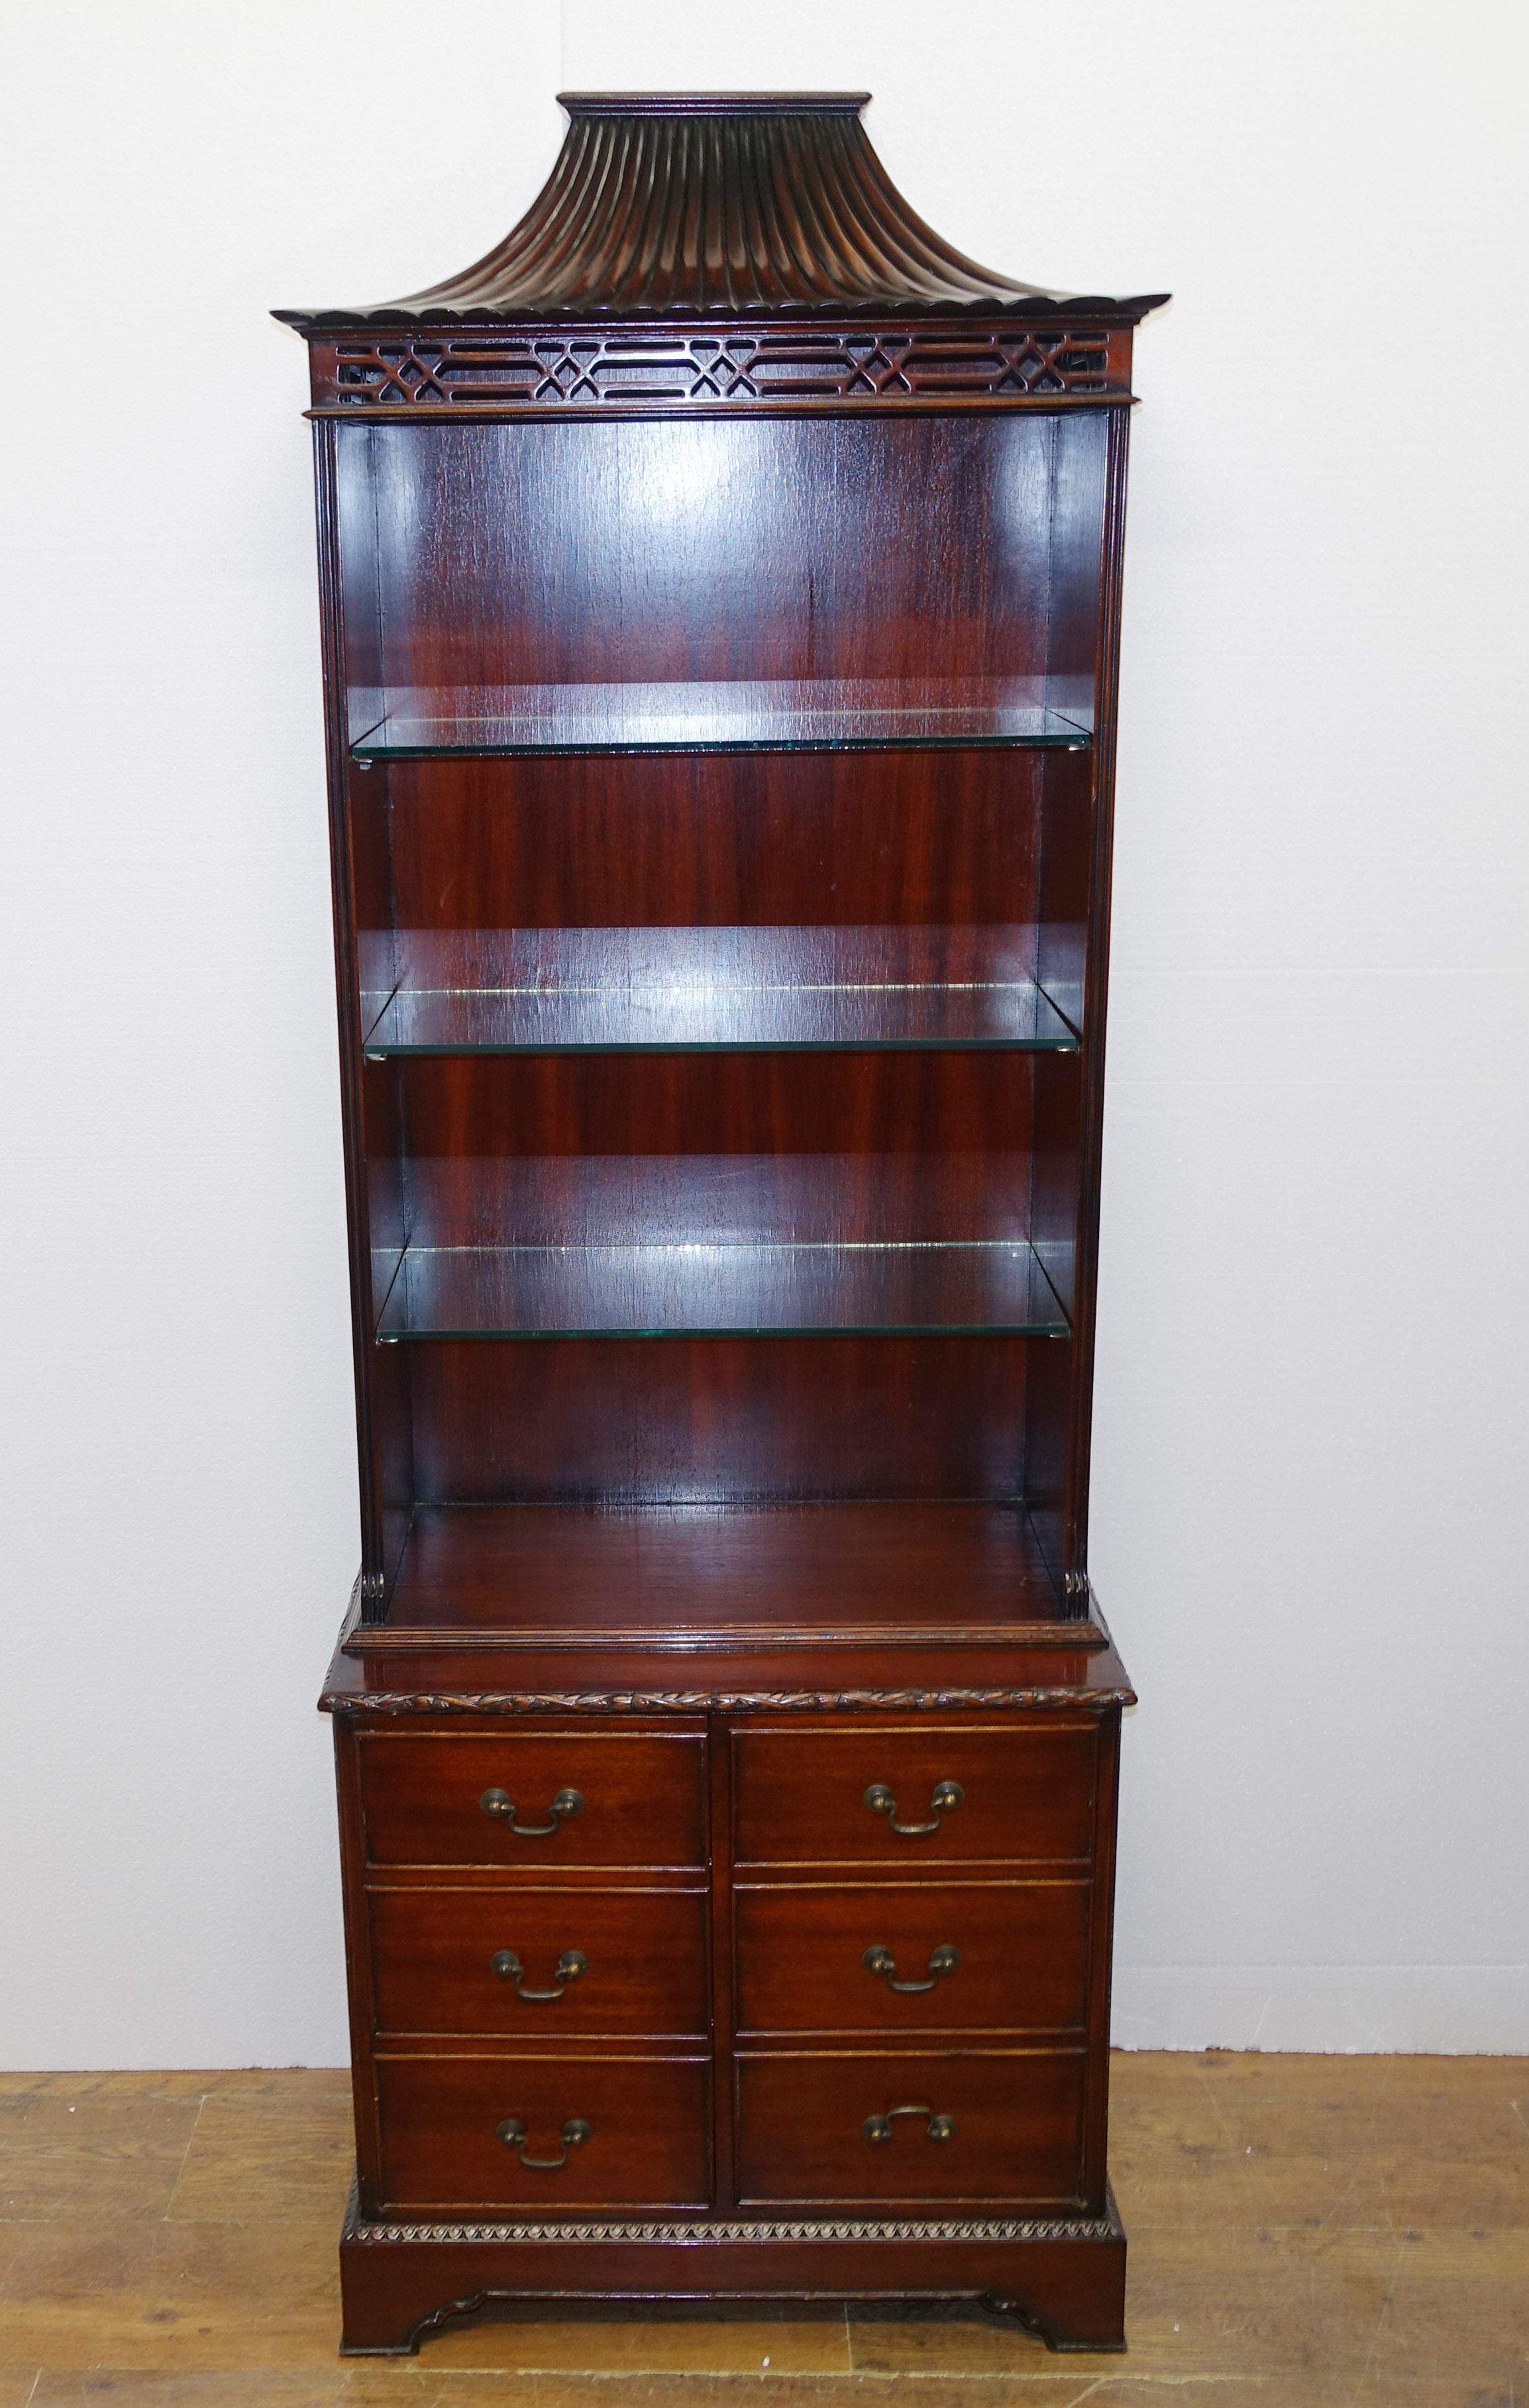 Elegant pair of antique bookcases in the Chinese Chippendale manner
Both are surmounted by the pagoda tops with intricate fret work below
Hand crafted from mahogany they feature adjustable glass shelving The bottom sections feature 8 bookcases to